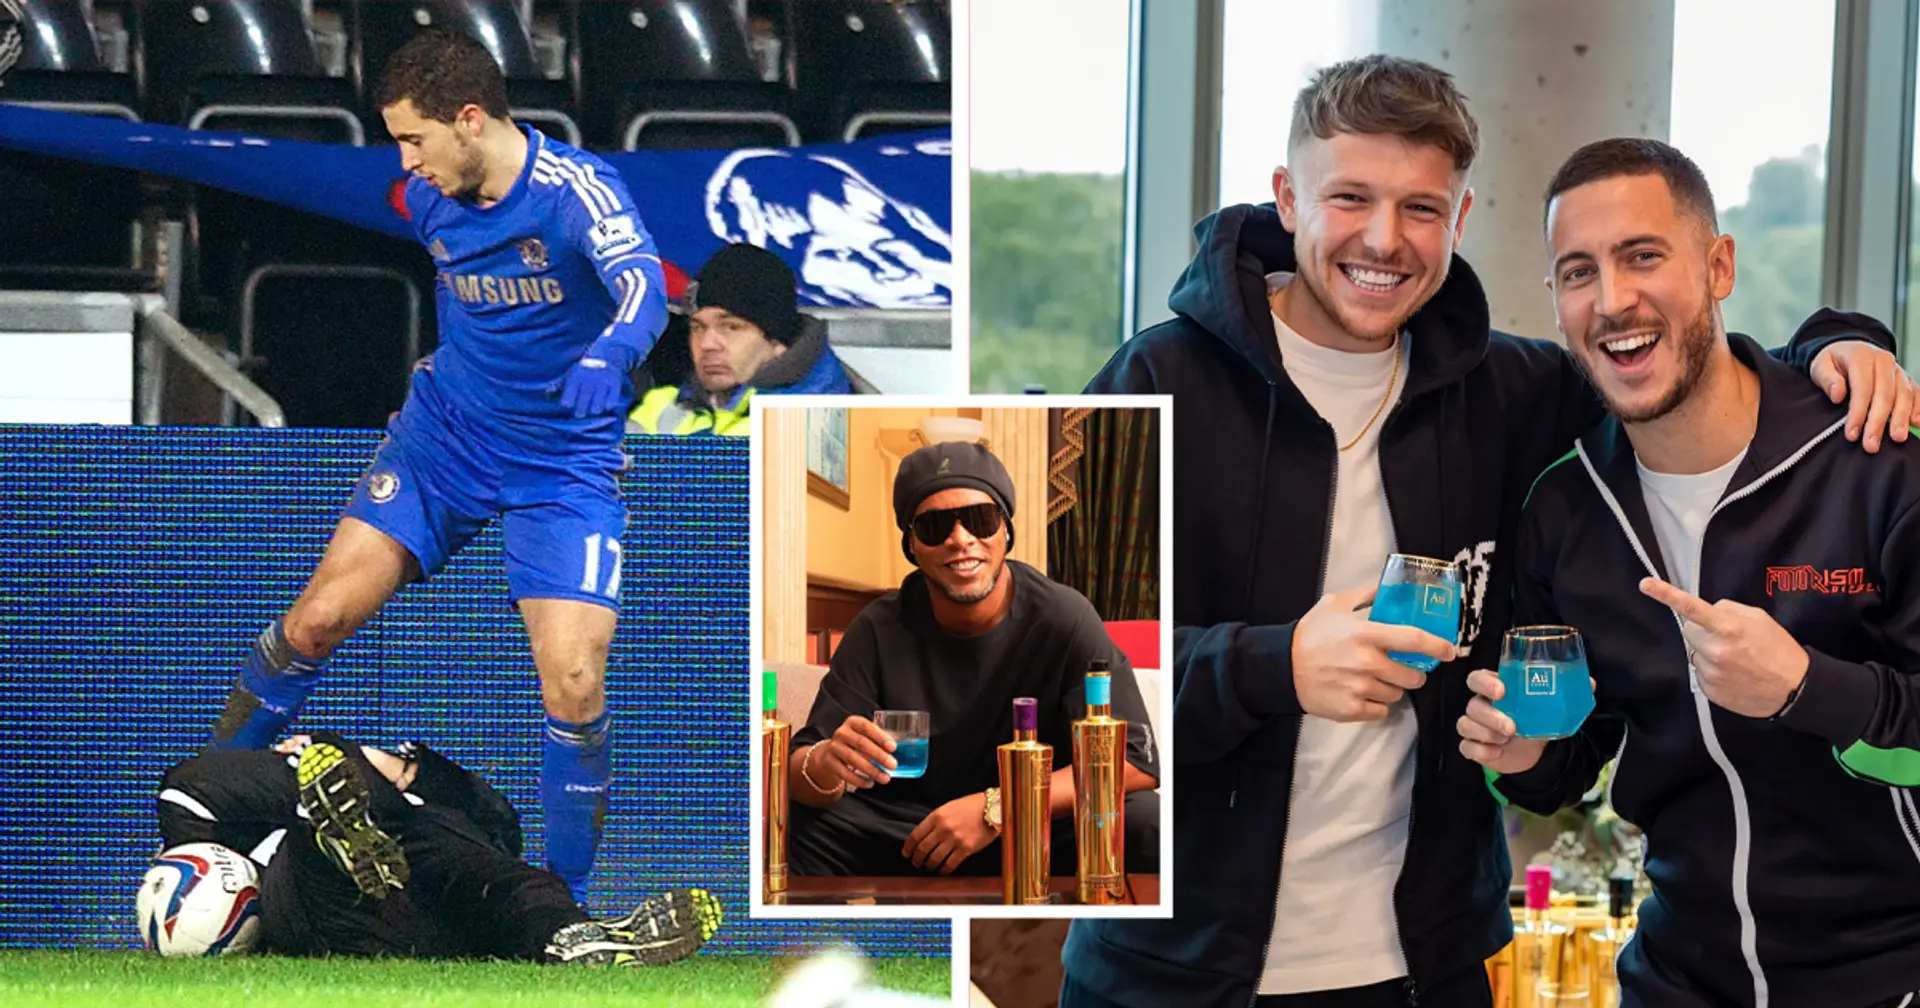 The ballboy Hazard kicked 11 years ago is now a millionaire: He owns a business worth an estimated £40m